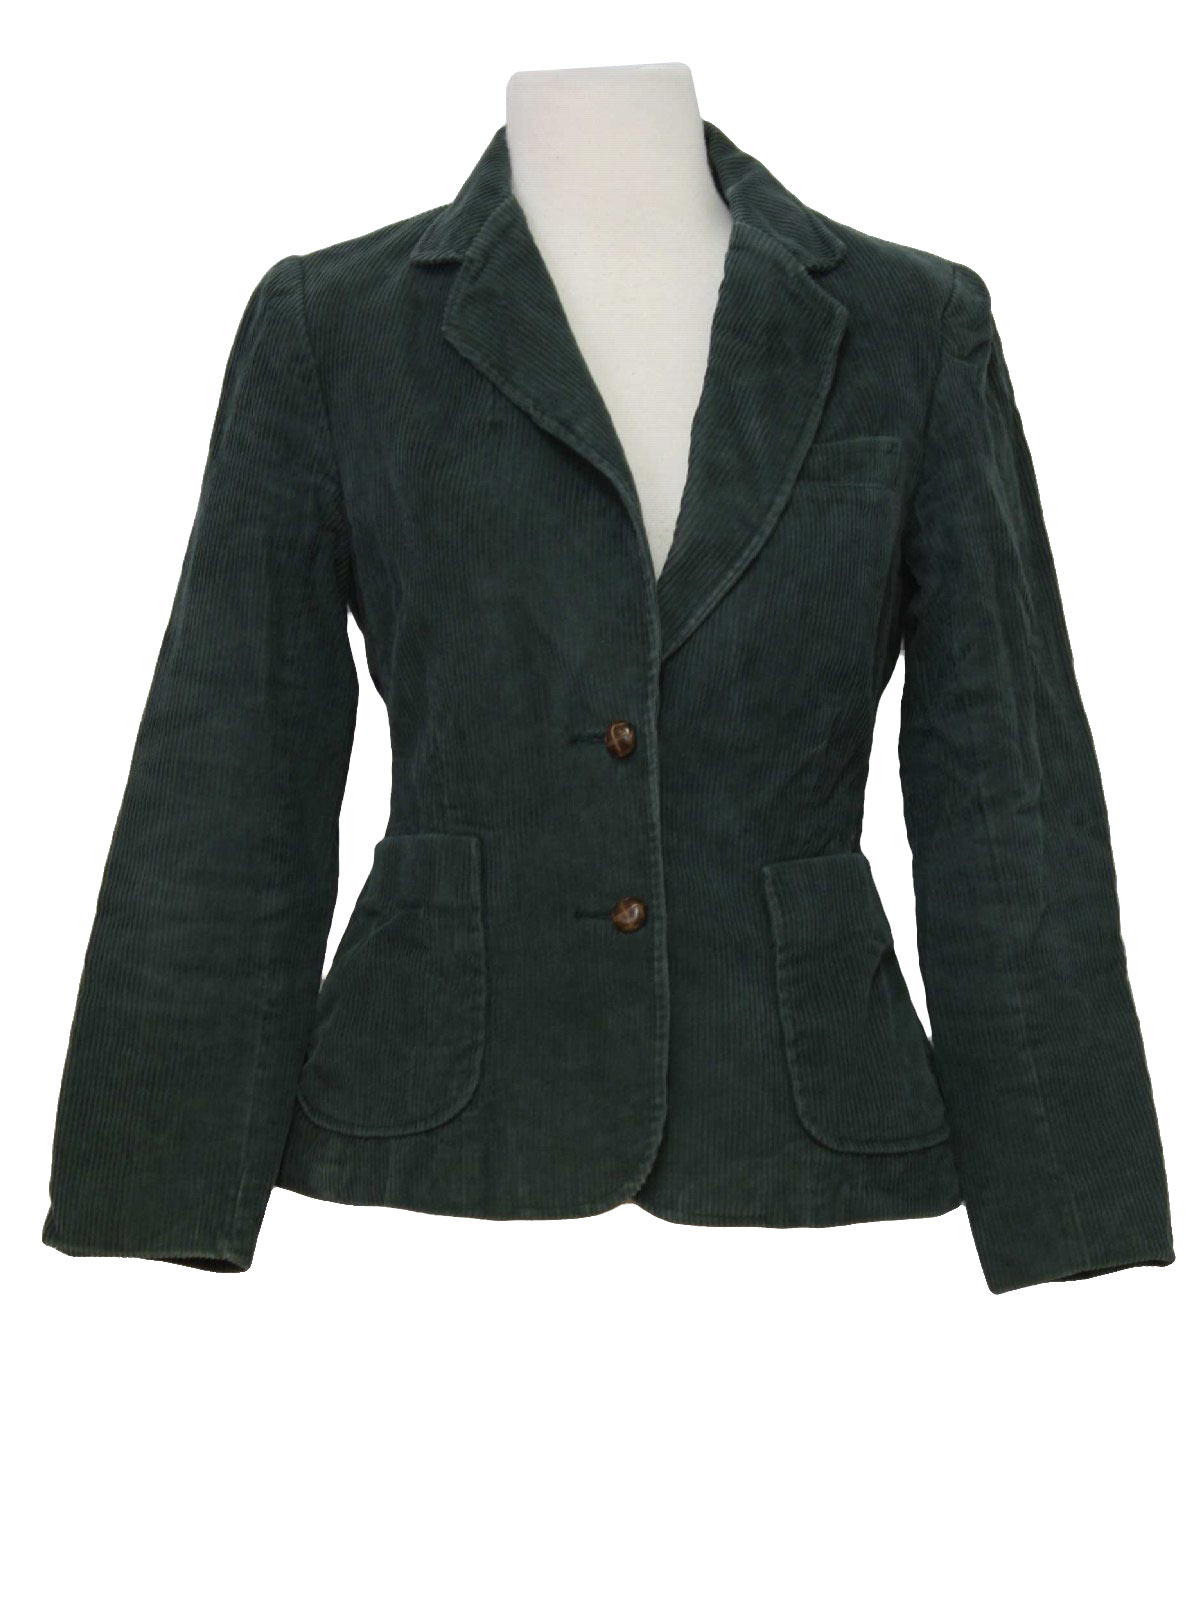 80s Vintage JCPenney Jacket: 80s -JCPenney- Womens forest green ...